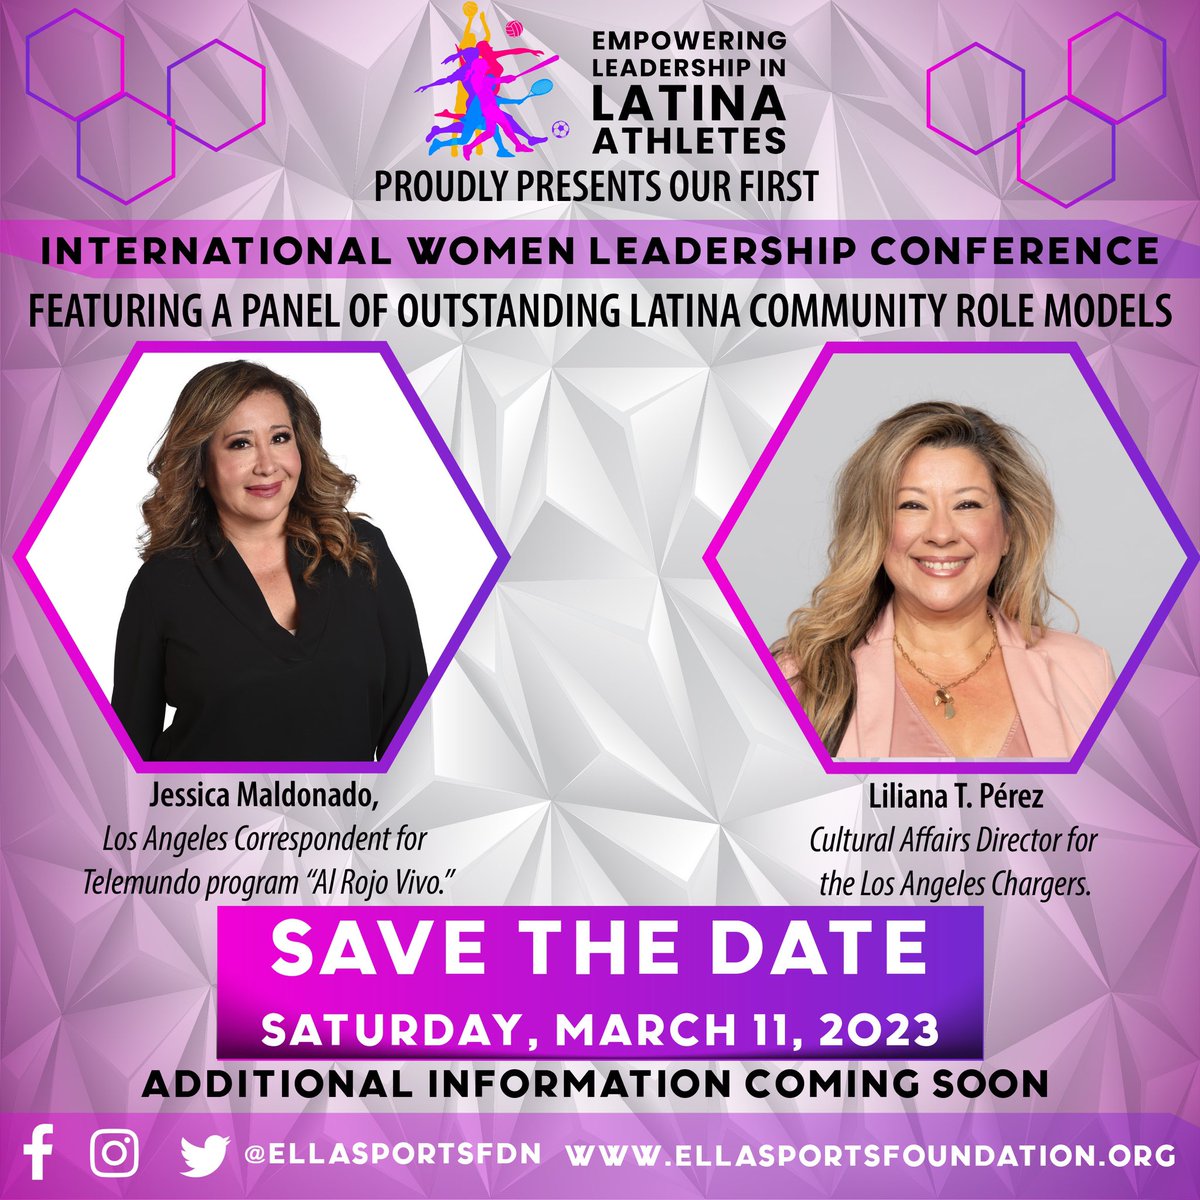 SAVE THE DATE 📅📅📅 for our very first International Women Leadership Conference!
Saturday March 11, 2023 !
Additional information coming soon.
#ellasportsfoundation #internationalwomenconference #jessicamaldonado #lilianaperez  #latinas #mesdelamujer #savethedate